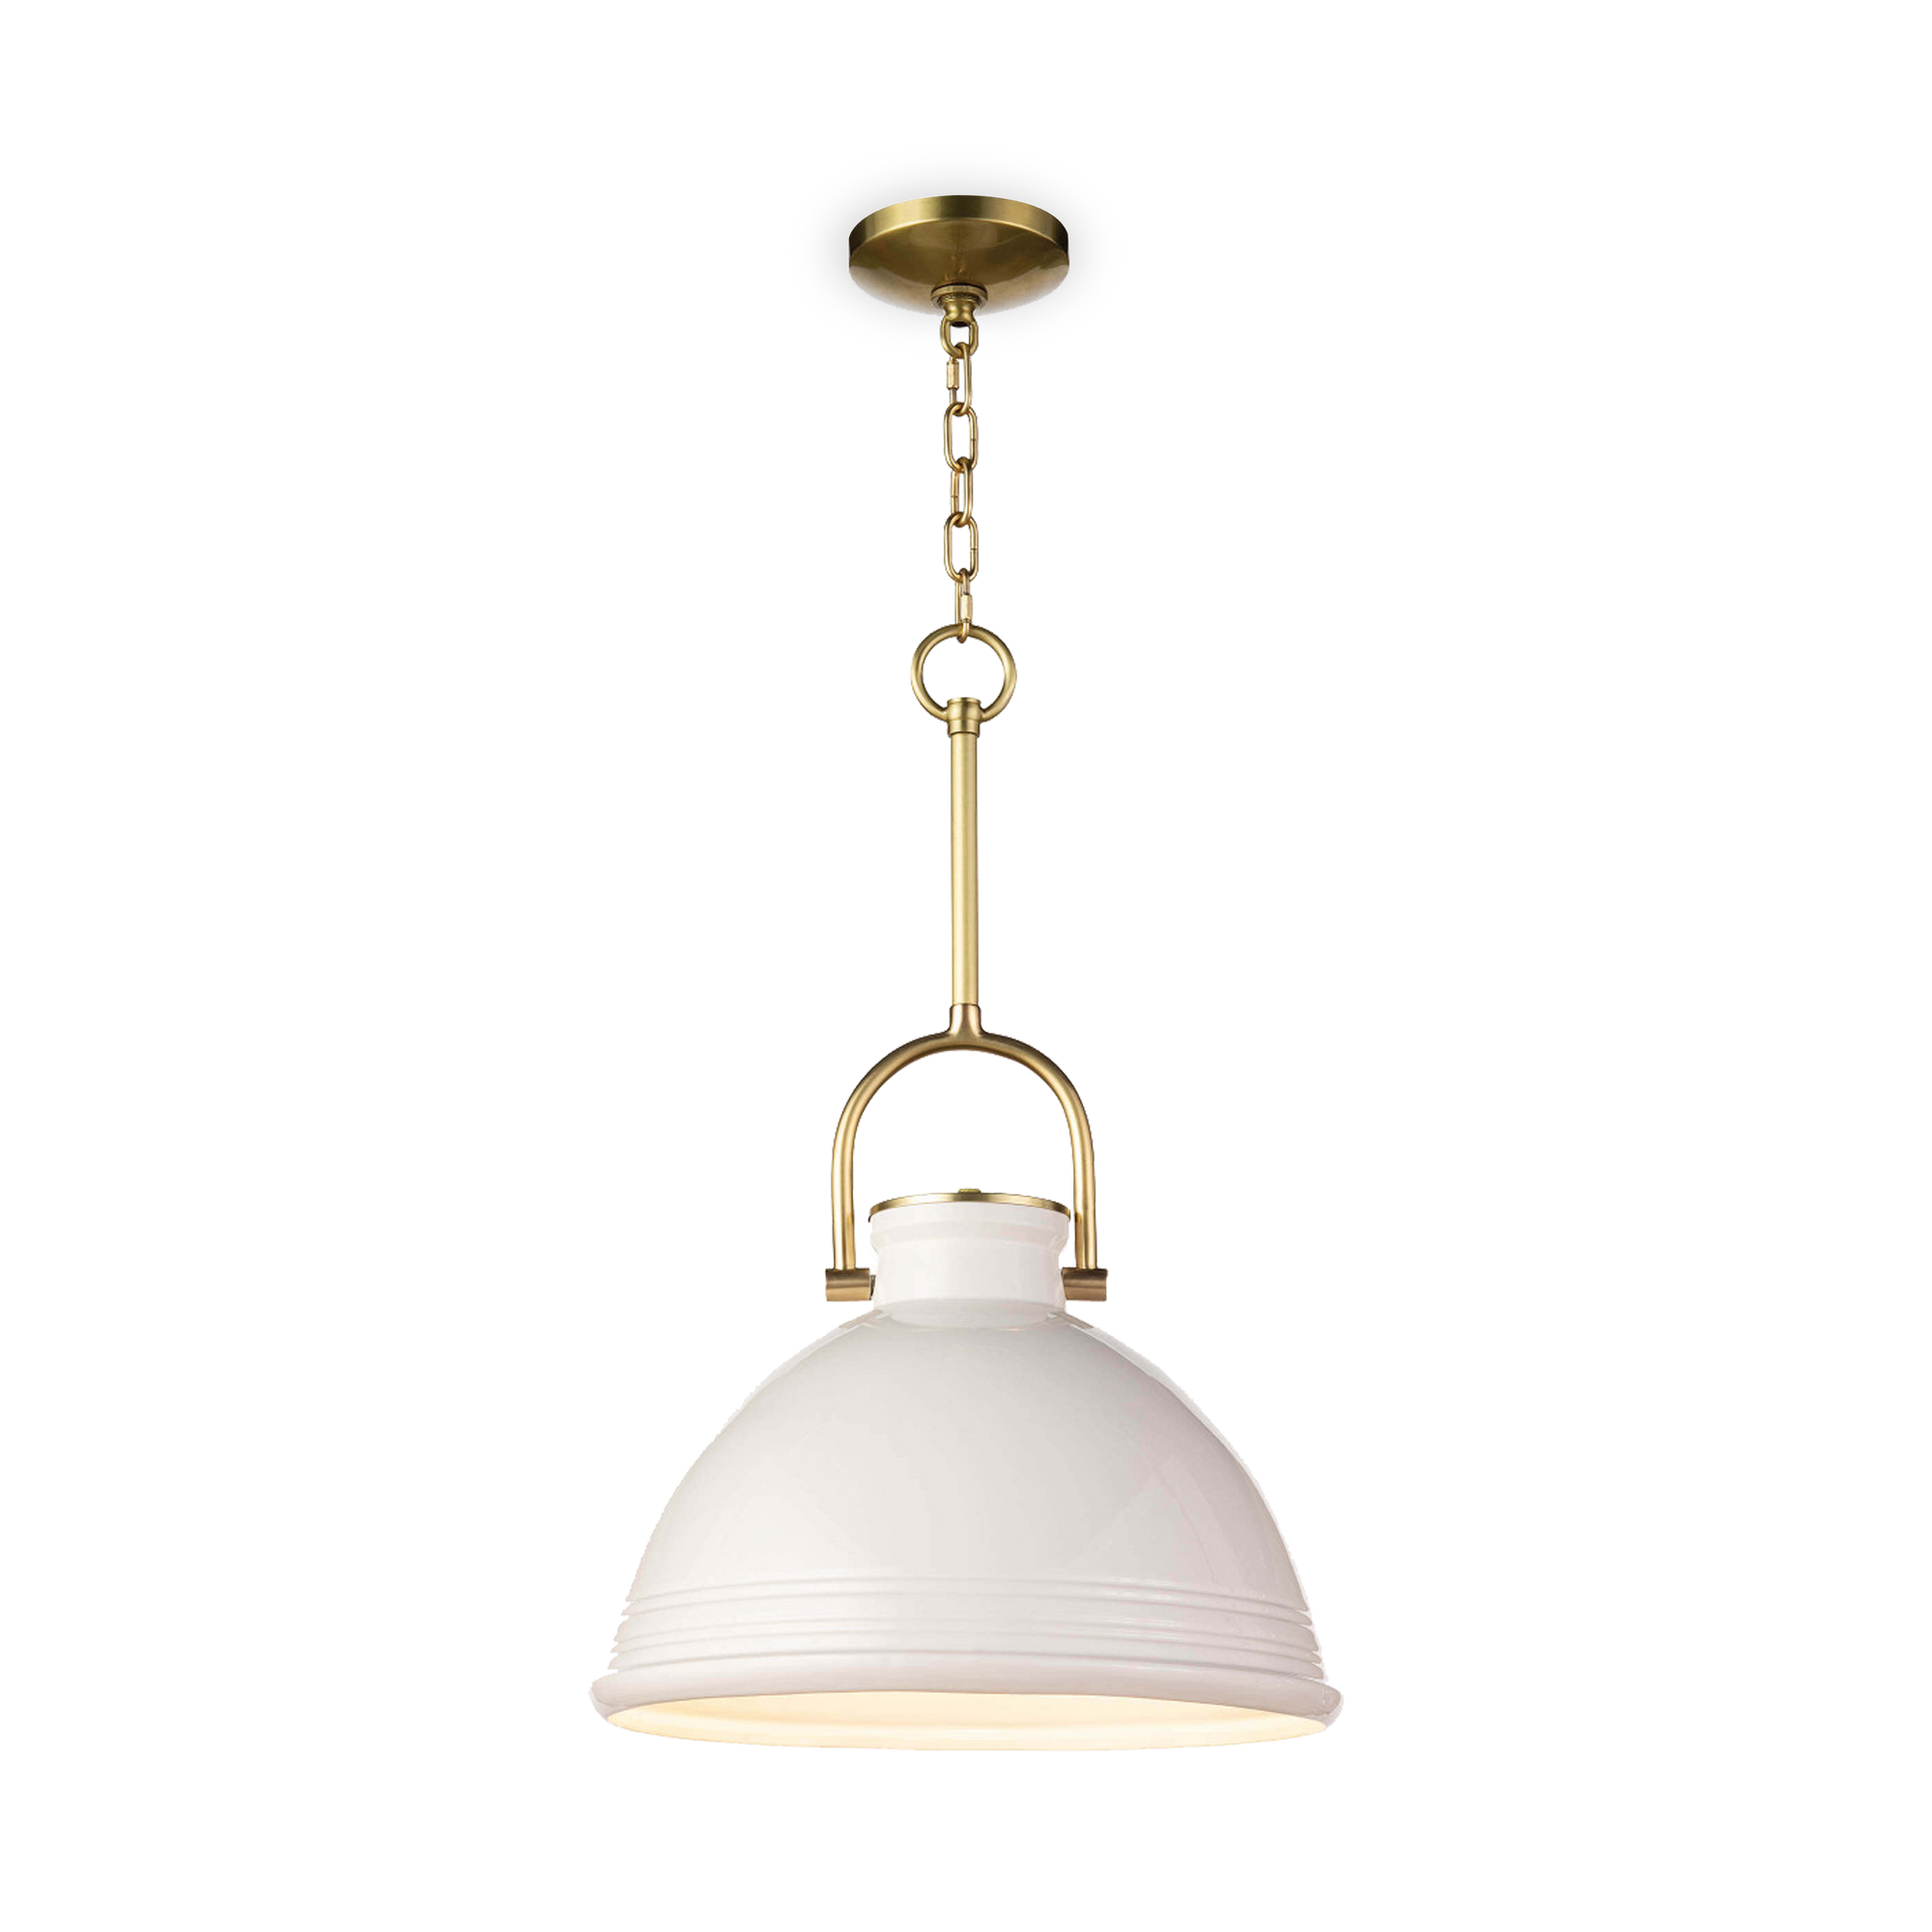 Classic lines combined with the hand touch of a potter make this ceramic pendant a statement piece for any kitchen or dining room.